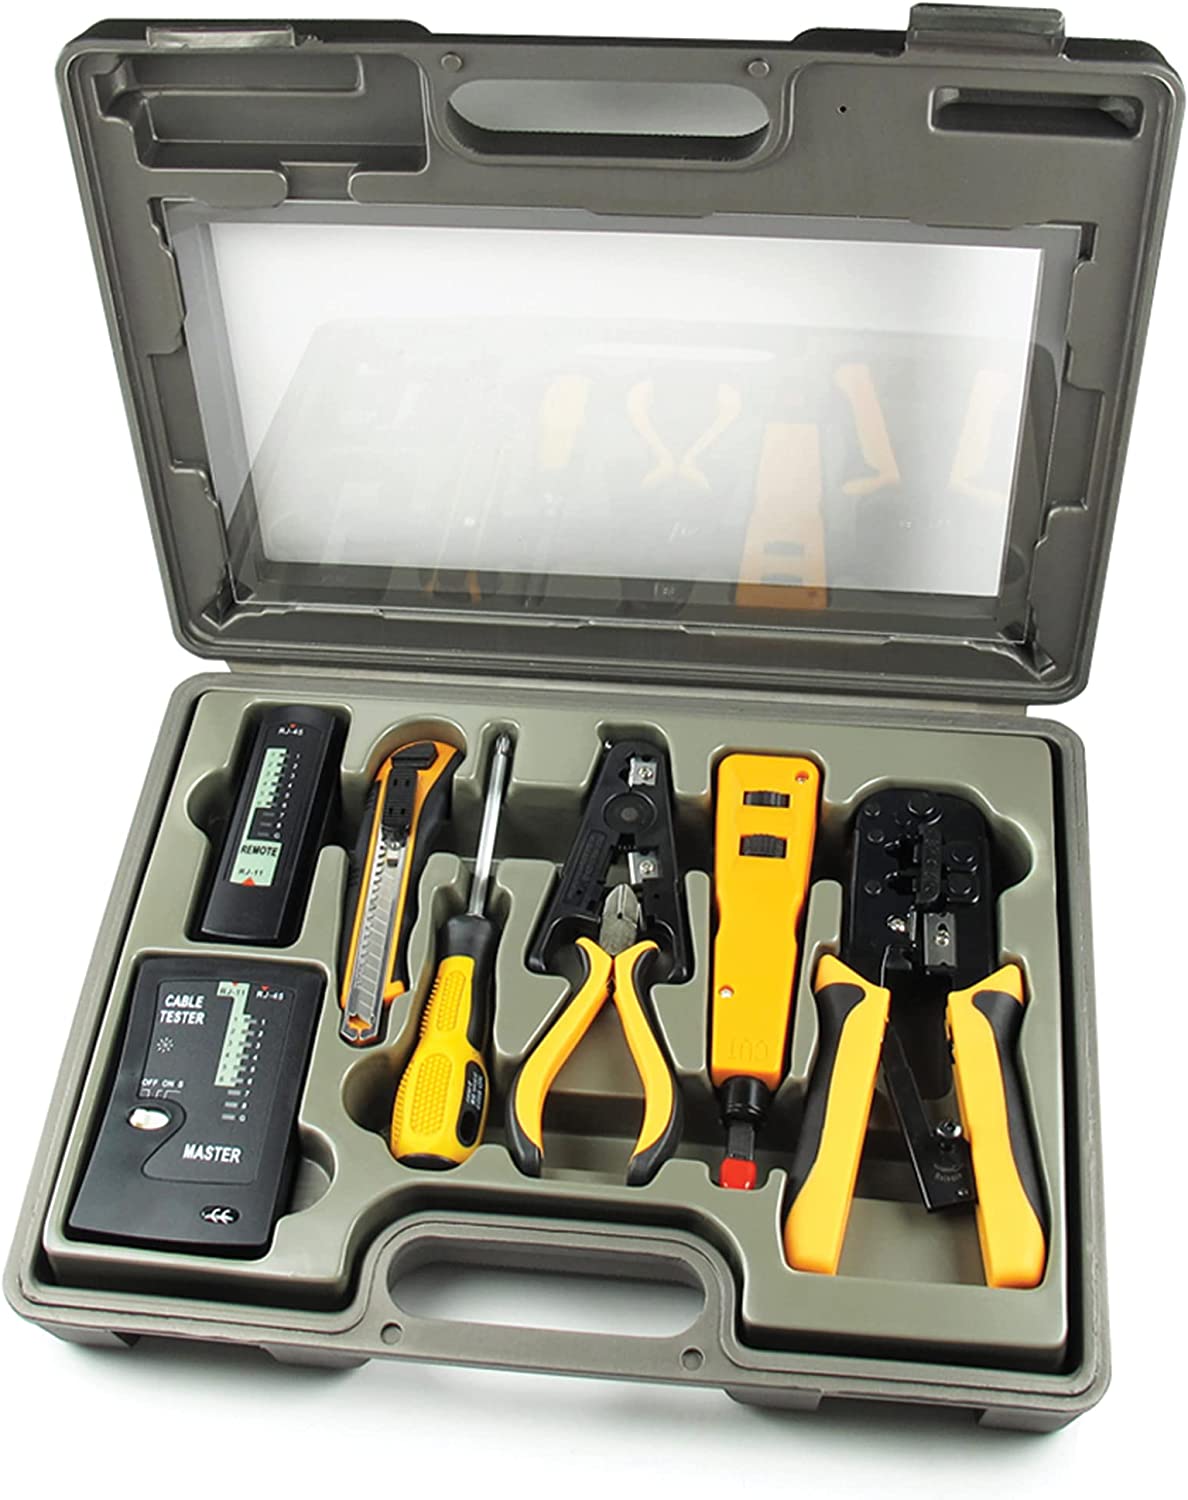 STK-988 10 in 1 Network Installation Tool Kit Cables Repair Maintenance Set, RJ45 and RJ11 Crimper, LAN Data Tester, 66 and /110 Punch Down, Stripper, Utility Knife, Screwdriver, and Hard Case